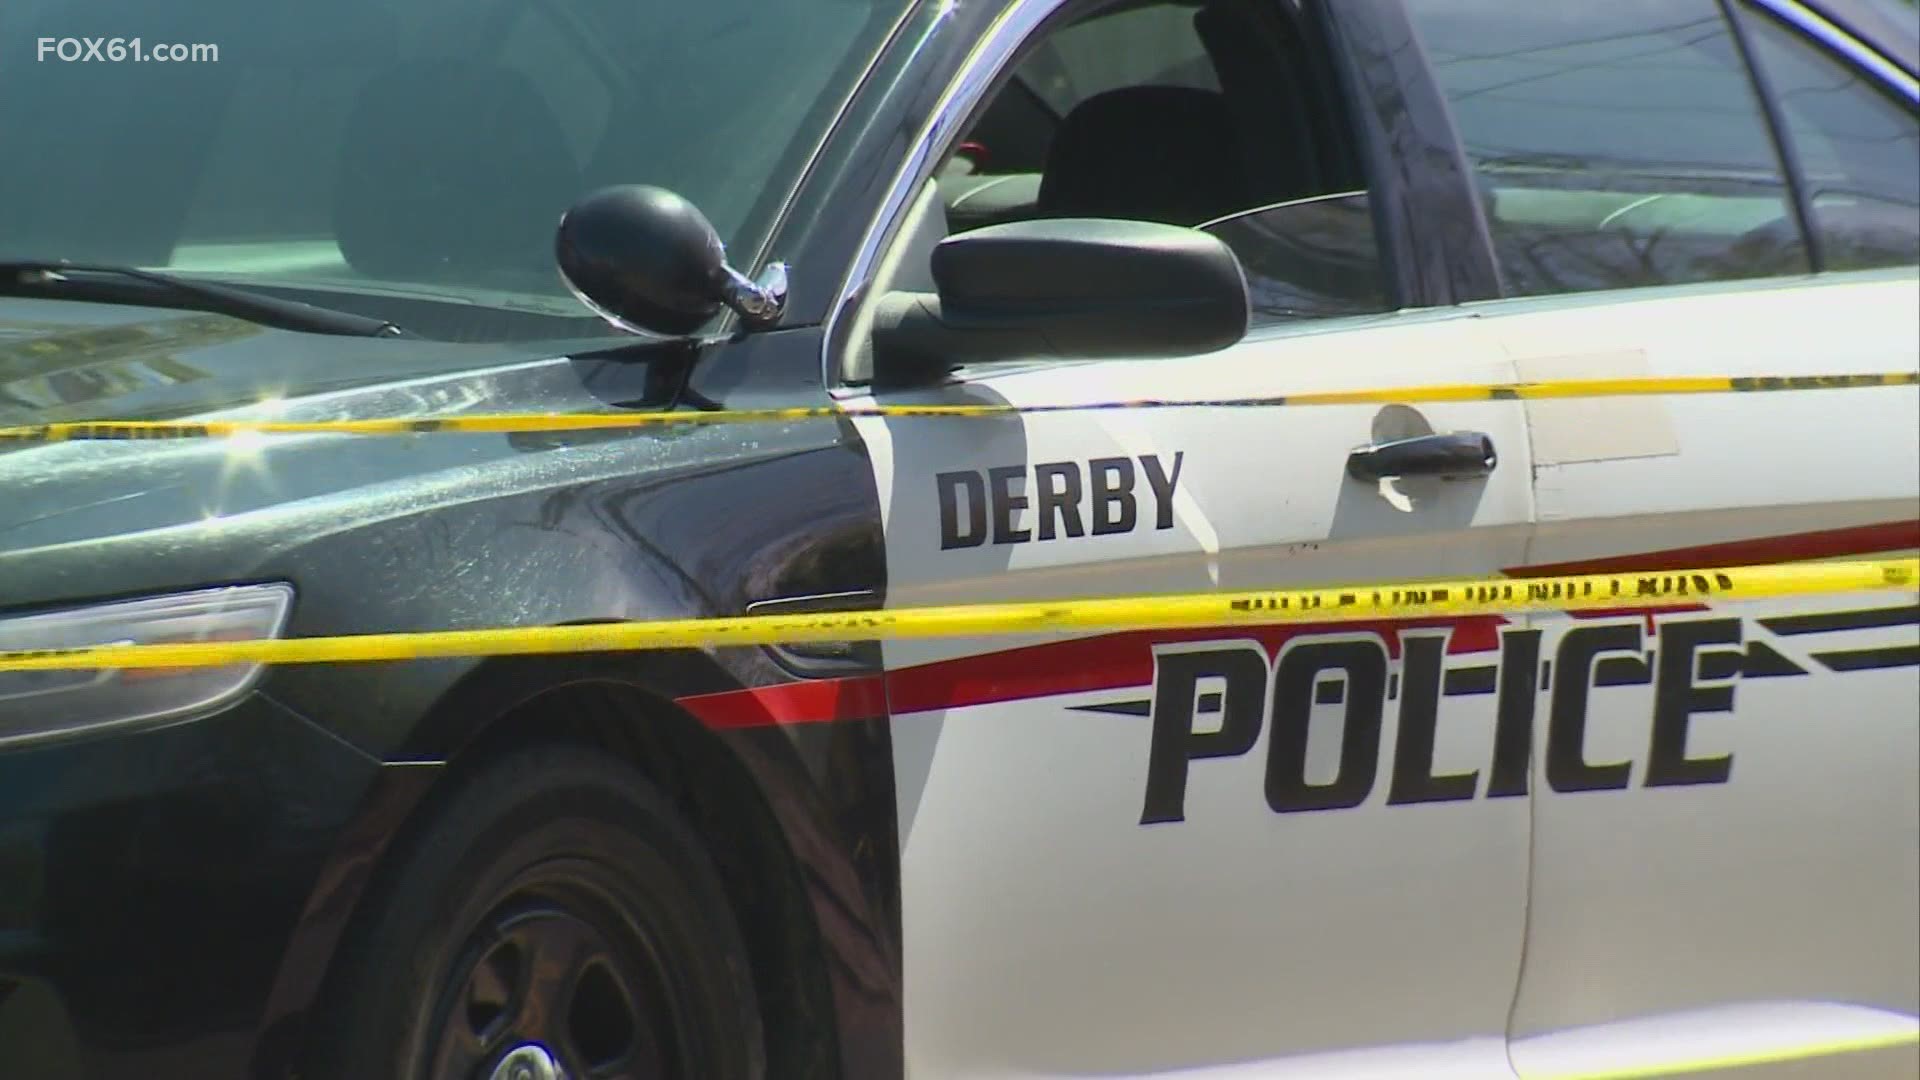 The incident involved Derby Police and occurred down the street from Griffin Hospital in the area of Division Street near Atwater and Clifton Avenues.